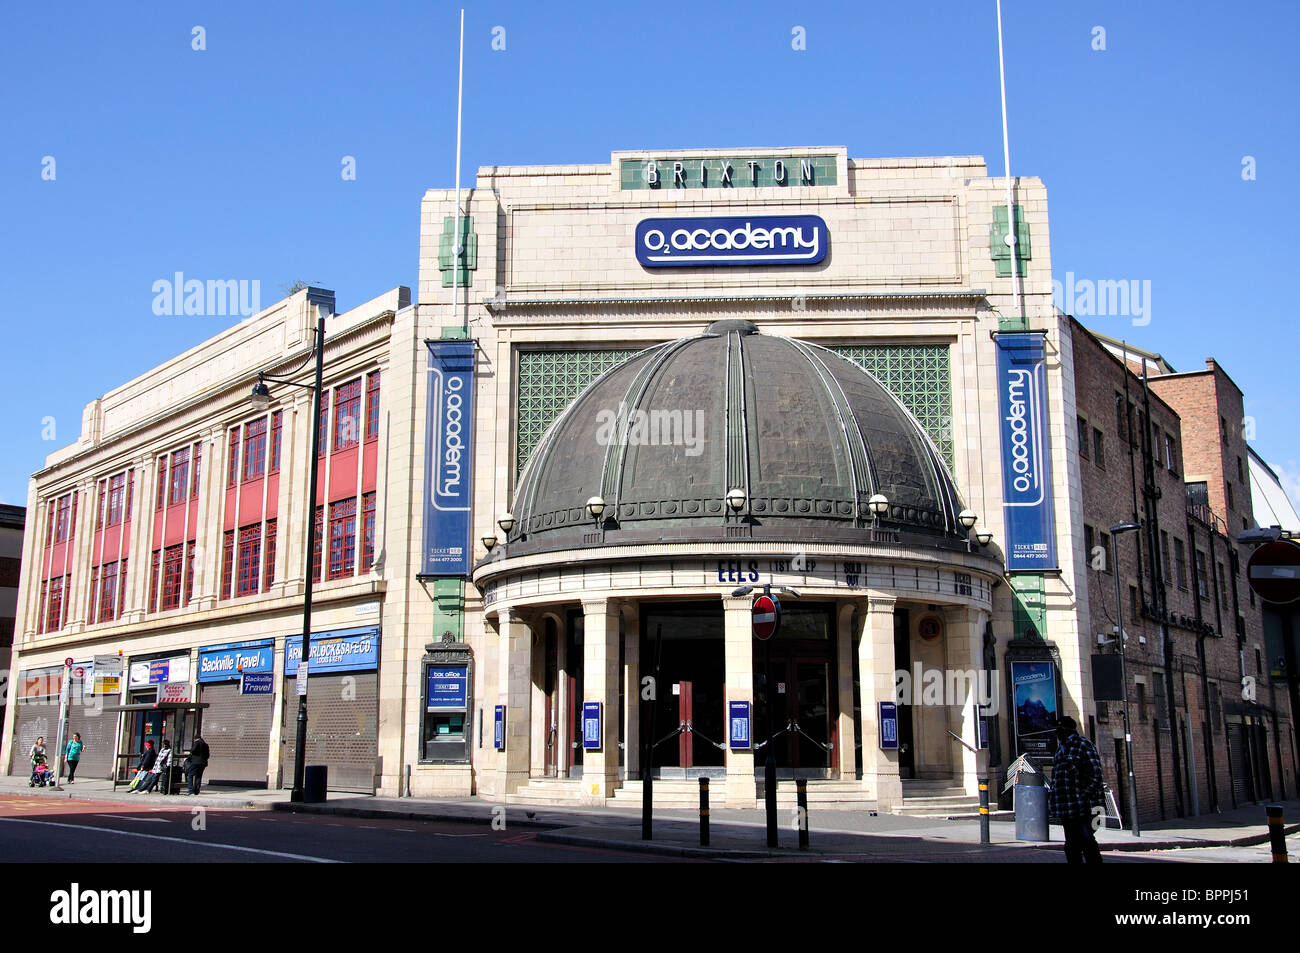 O2 Academy Brixton, Stockwell Road, Brixton, London Borough of Lambeth, Greater London, Angleterre, Royaume-Uni Banque D'Images